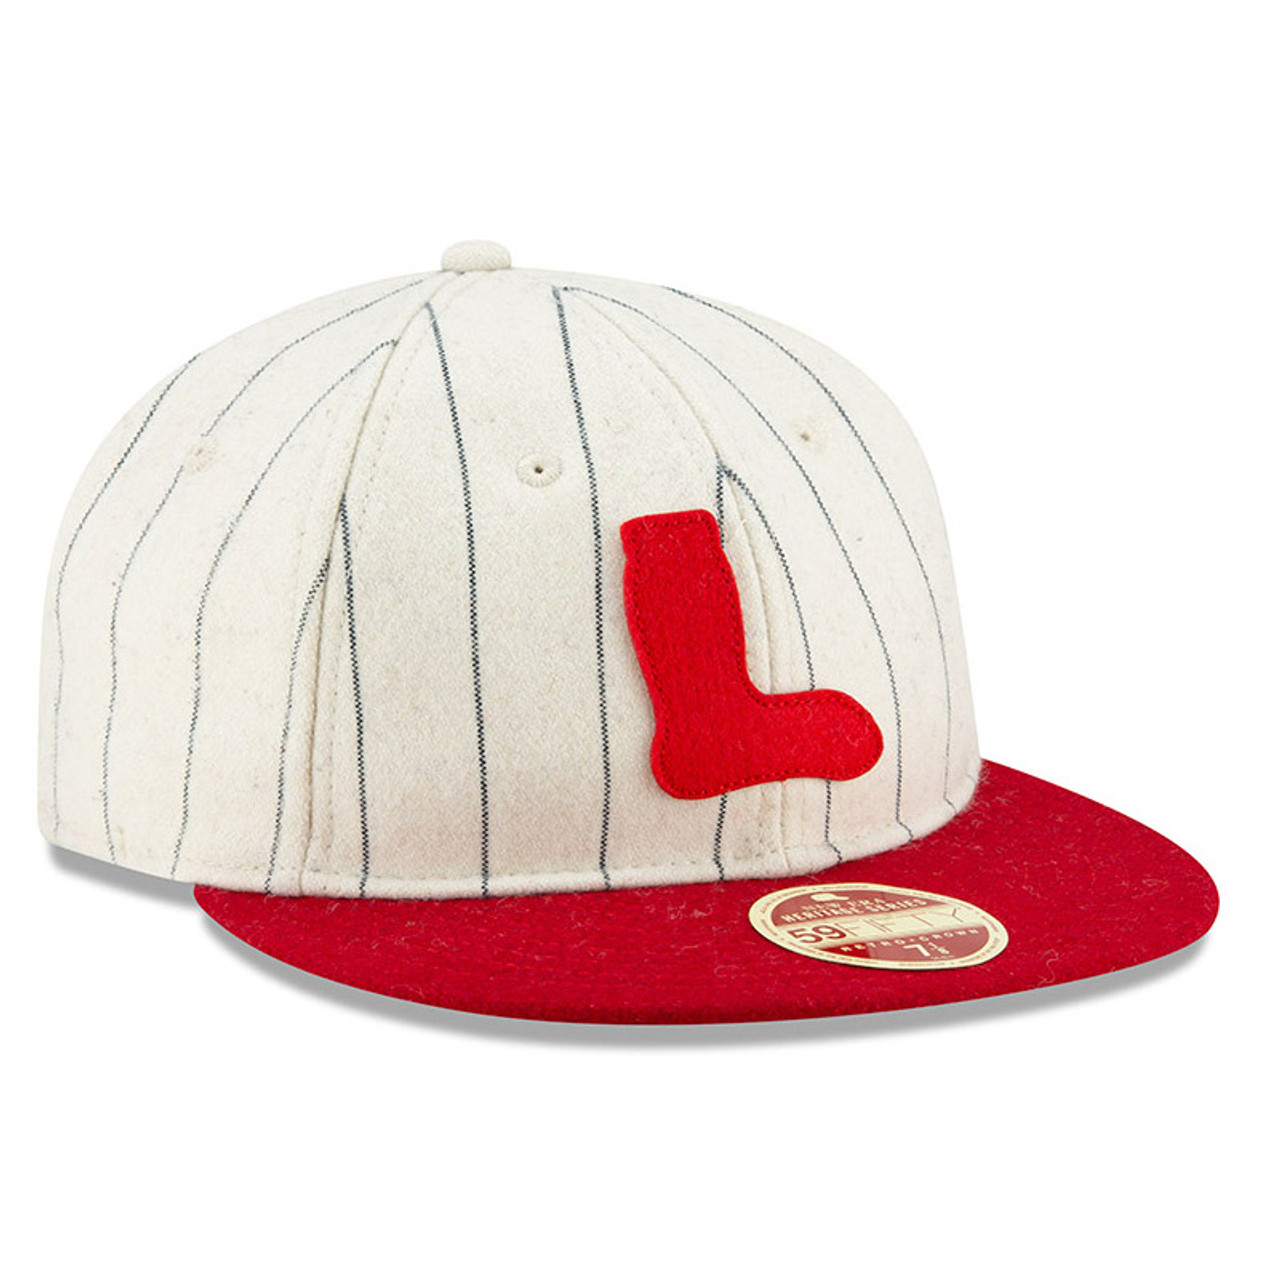 New Era Red Sox 59Fifty Authentic Cap